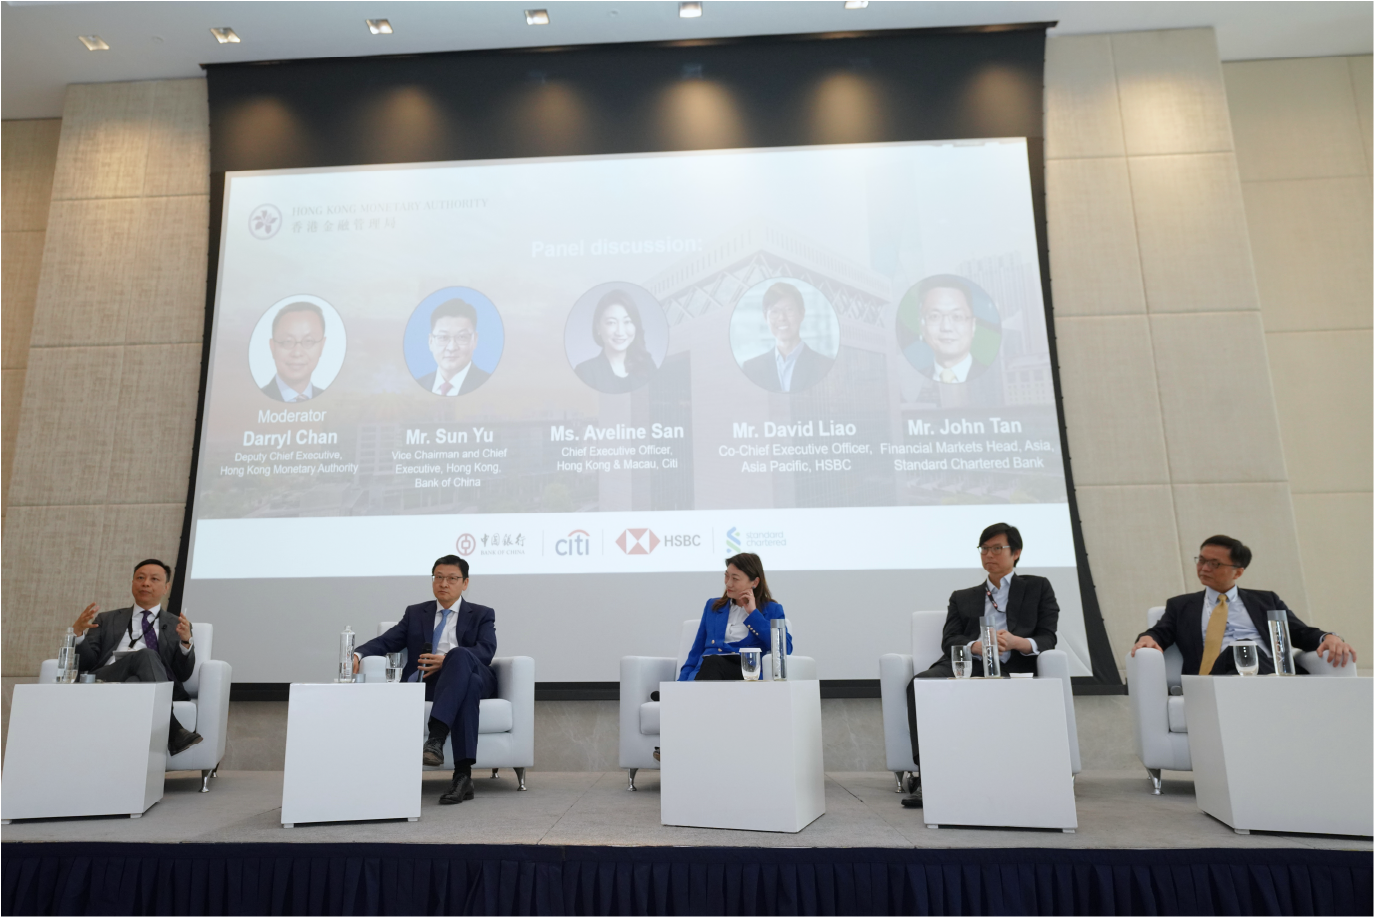 The Deputy Chief Executive of the Hong Kong Monetary Authority, Mr Darryl Chan (first left), moderates a panel discussion at a luncheon in Dubai, the United Arab Emirates on May 31 (Dubai time) to demonstrate Hong Kong's value propositions as a leading international financial centre. Other panel speakers include (from left) Chairman, The Hong Kong Association of Banks; Vice Chairman and Chief Executive, Bank of China (Hong Kong), Mr Sun Yu; Chief Executive Officer, Hong Kong and Macau, Citi, Ms Aveline San; Co-Chief Executive, Asia-Pacific, The Hongkong and Shanghai Banking Corporation, Mr David Liao; and Financial Markets Head, Asia, Standard Chartered Bank, Mr John Tan.